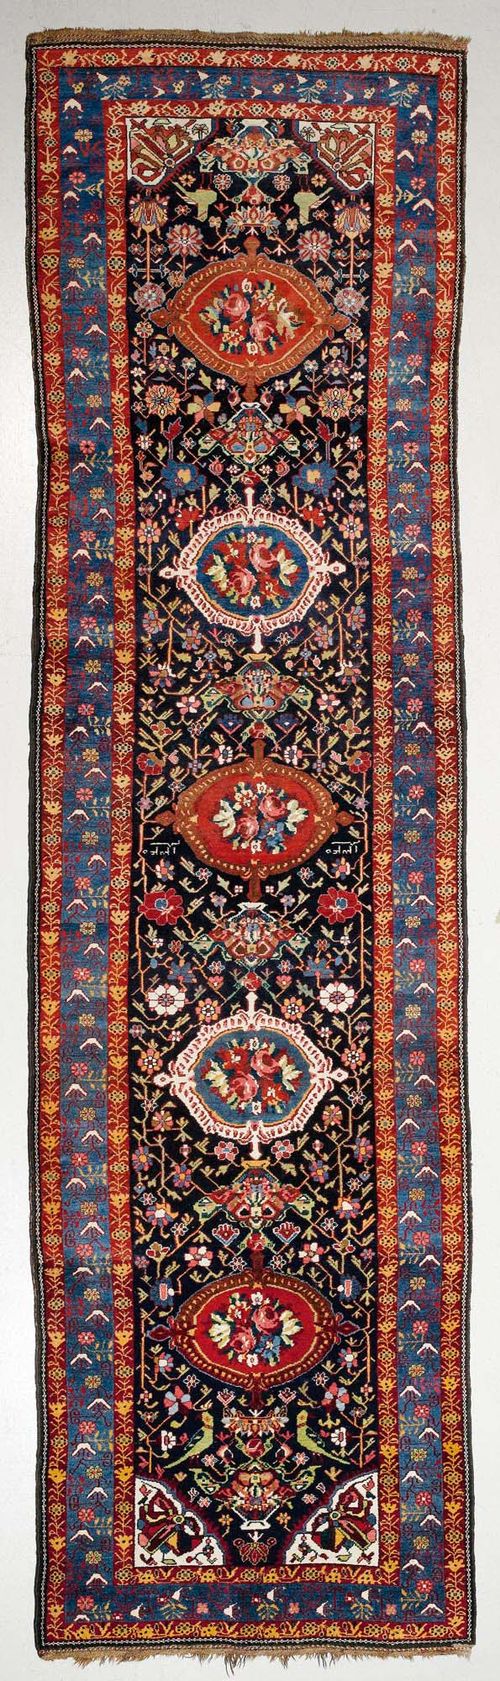 BACHTIAR antique.Black central field with five rose medallions, opulently patterned with stylised plants and birds, blue border, 130x450 cm.